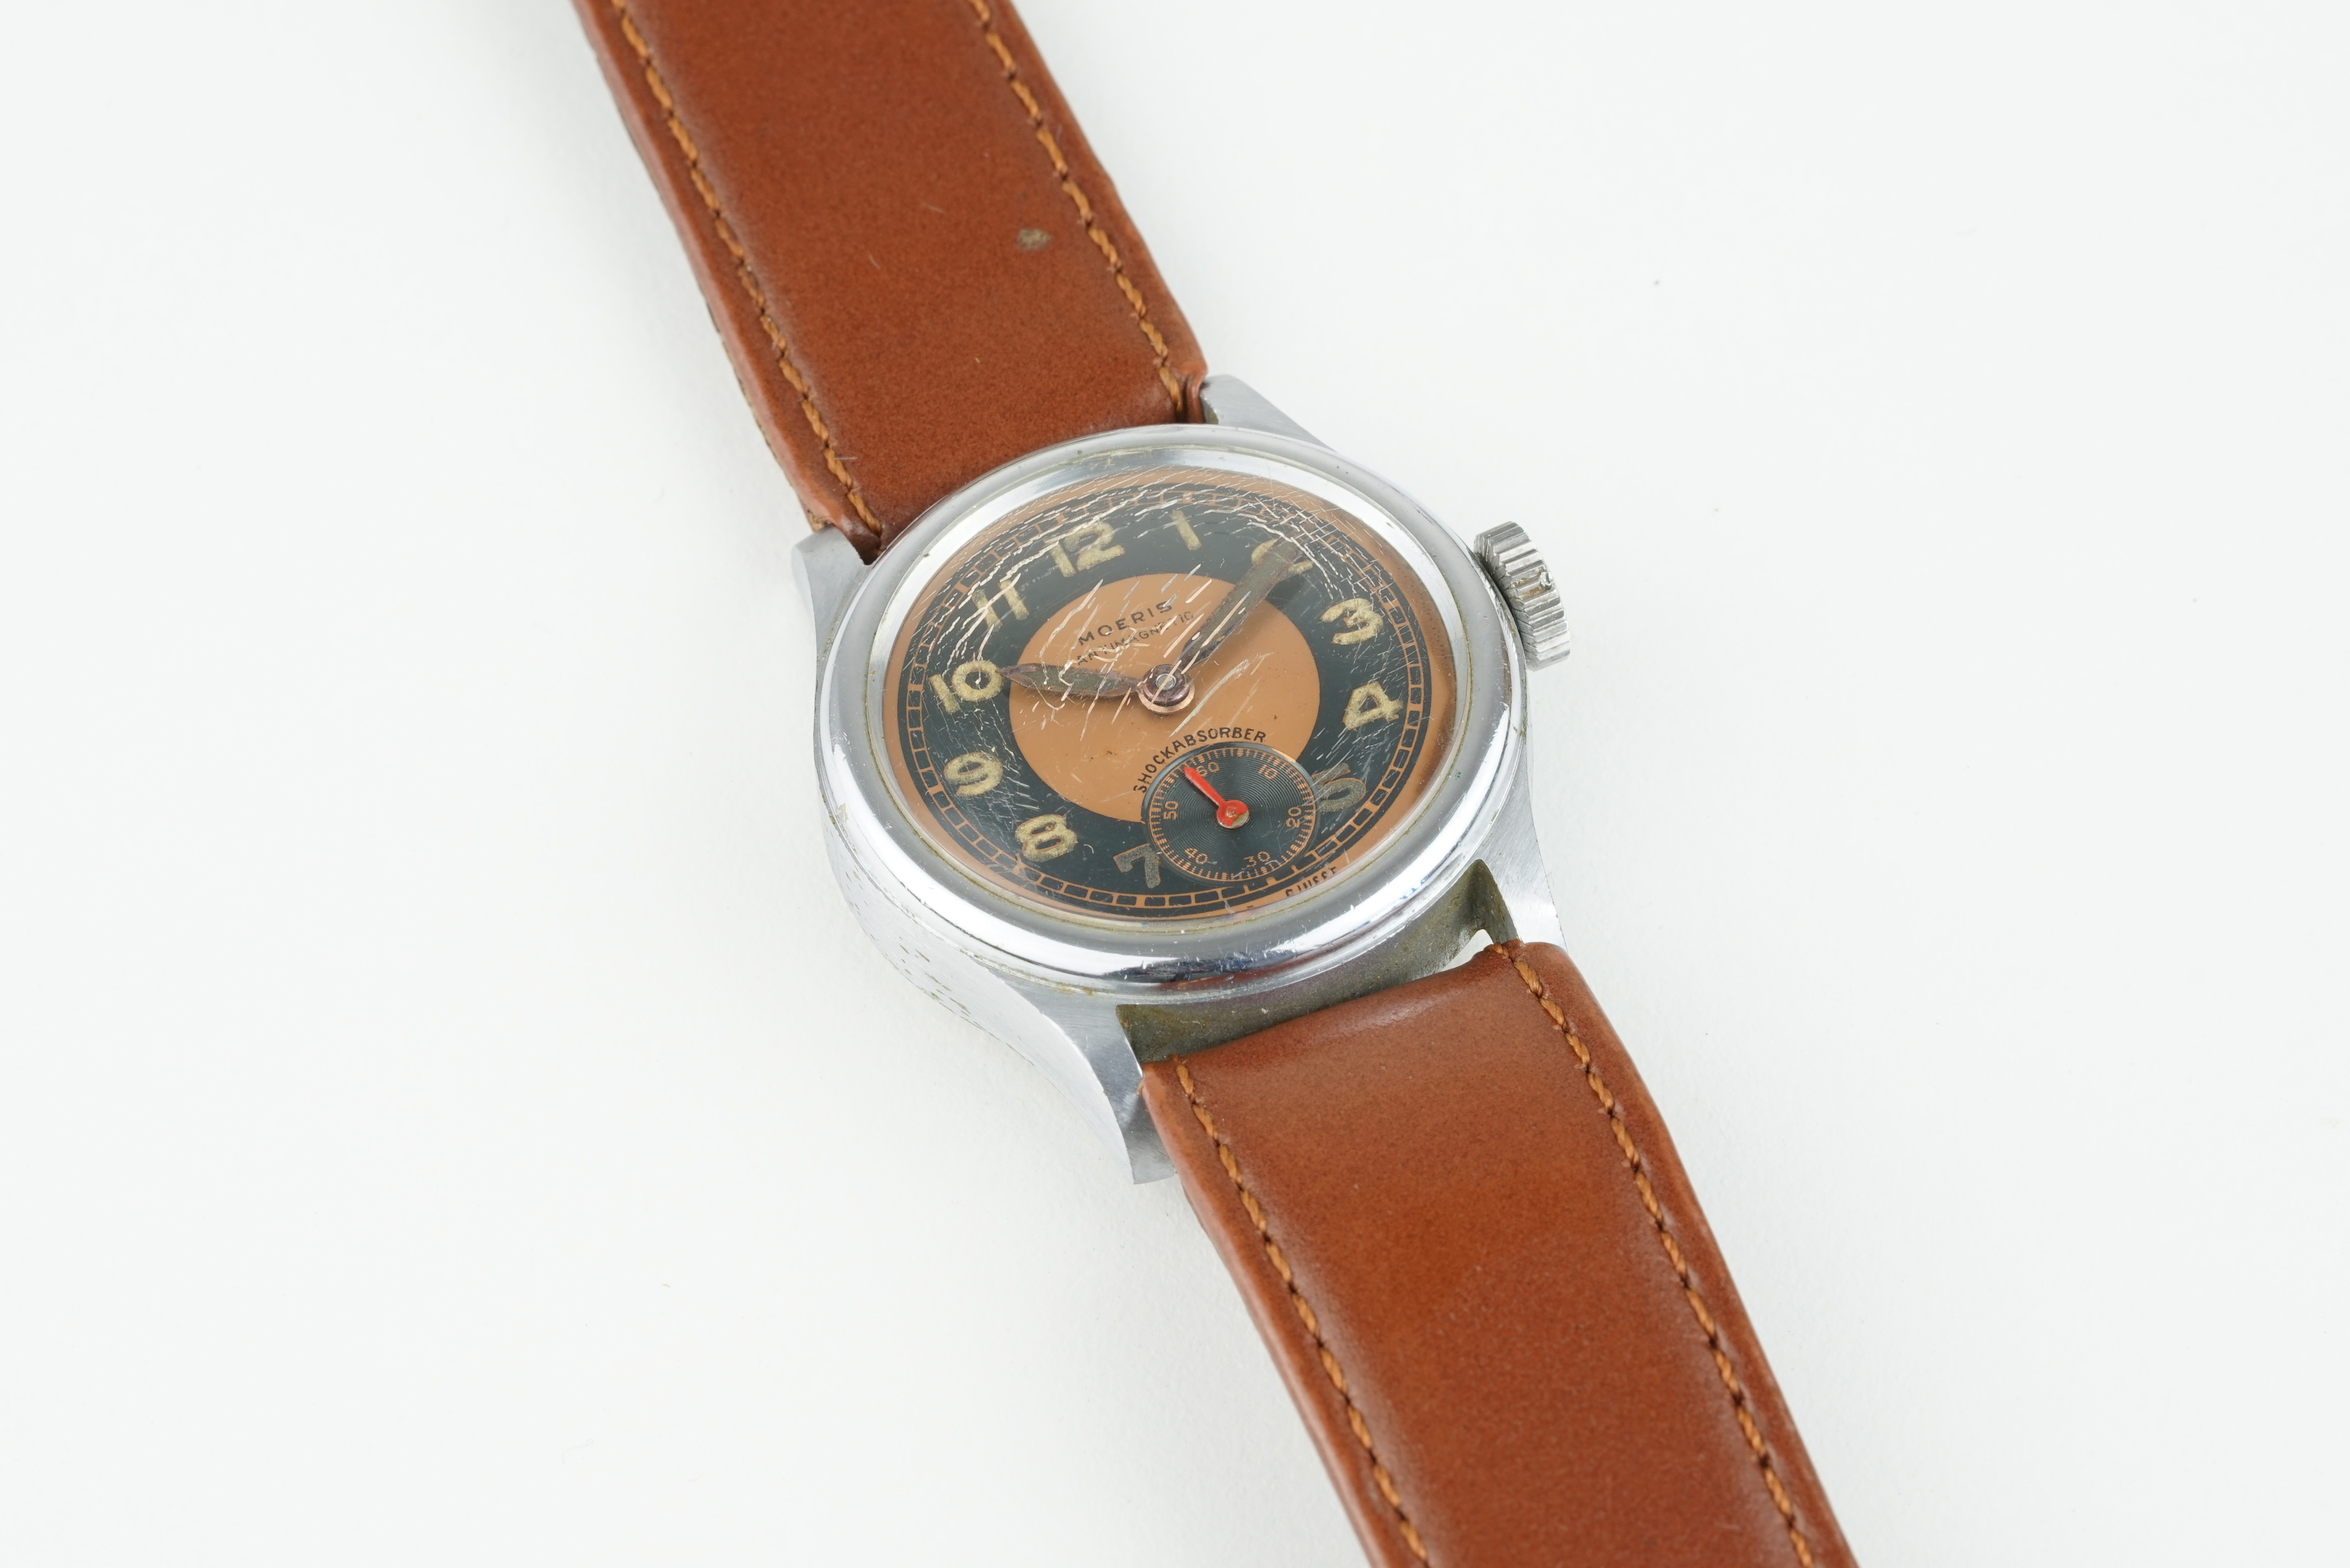 MOERIS VINTAGE WRISTWATCH, circular two tone dial with hour markers and hands, 29mm steel case